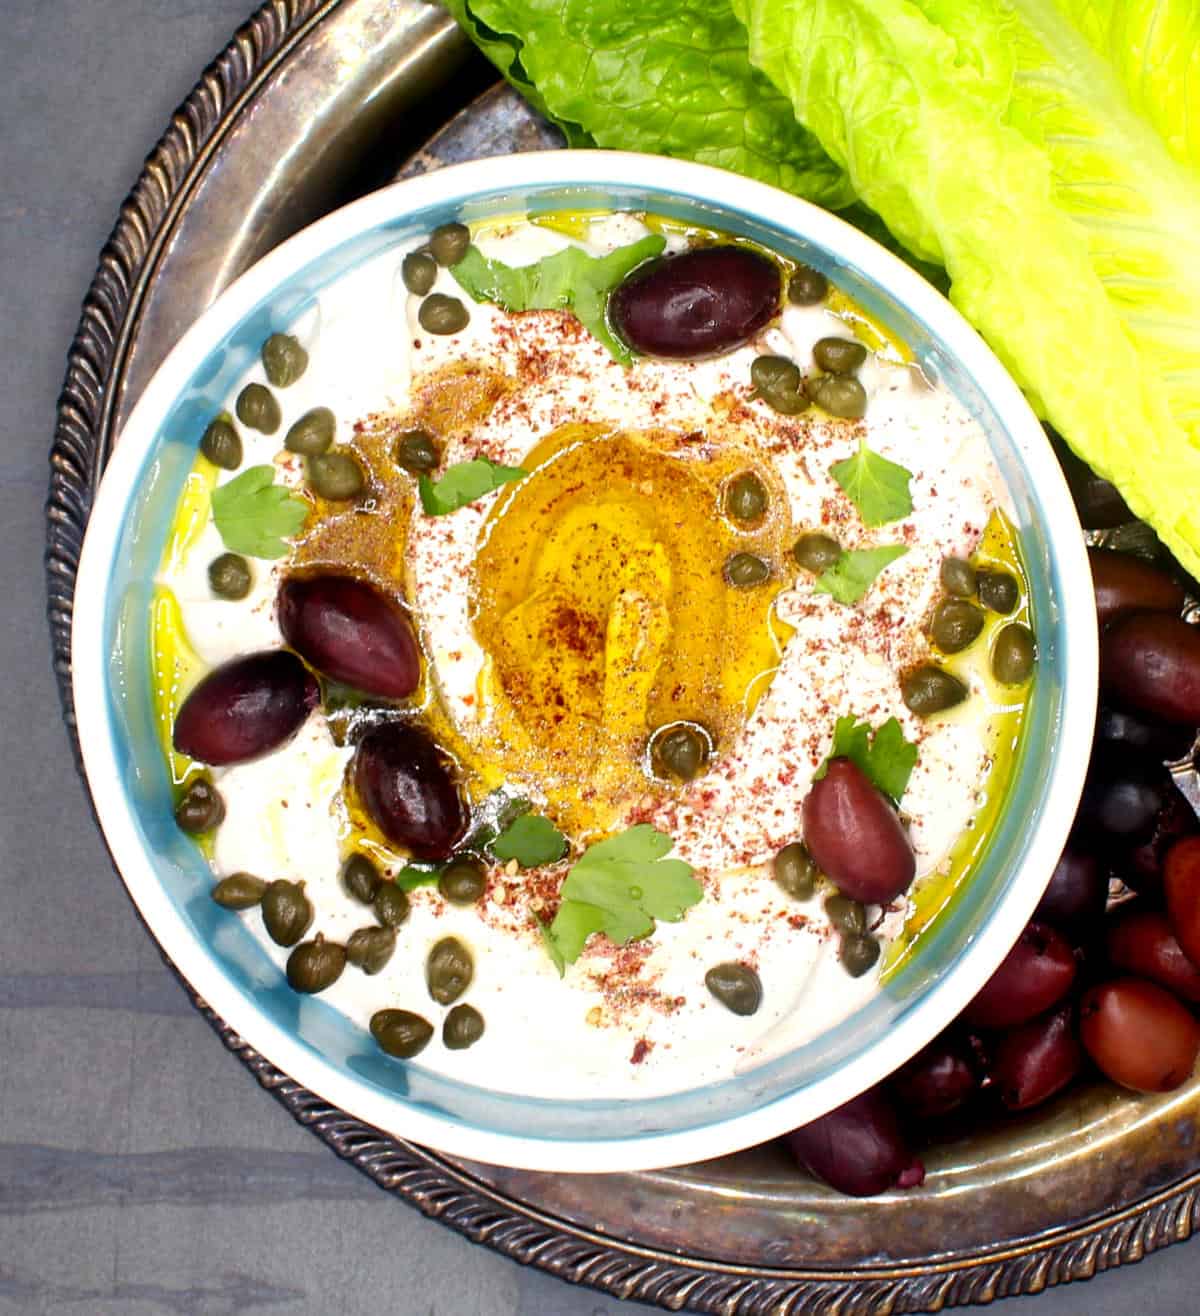 Vegan labneh with za'atar, olive oil, capers and parsley in a bowl with lettuce and olives on the side.